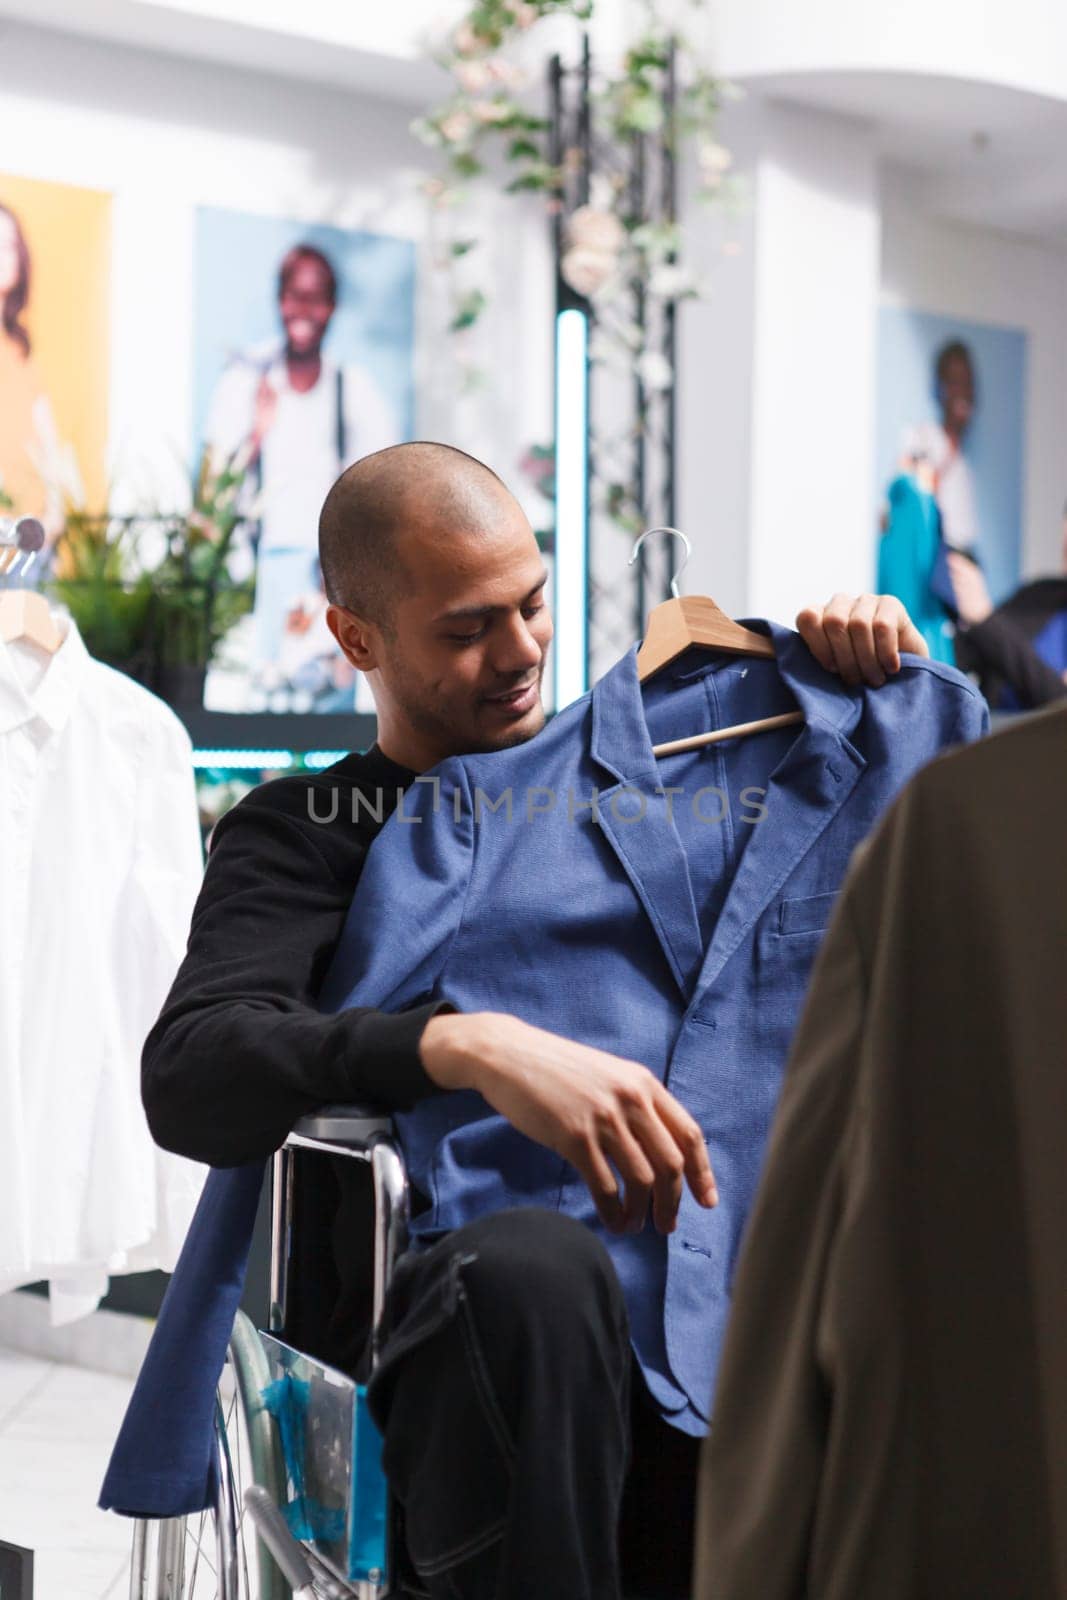 Smiling arab buyer in wheelchair holding jacket to body, examining formal apparel fit and size before making purchase in boutique. Clothing store customer with disability choosing outfit